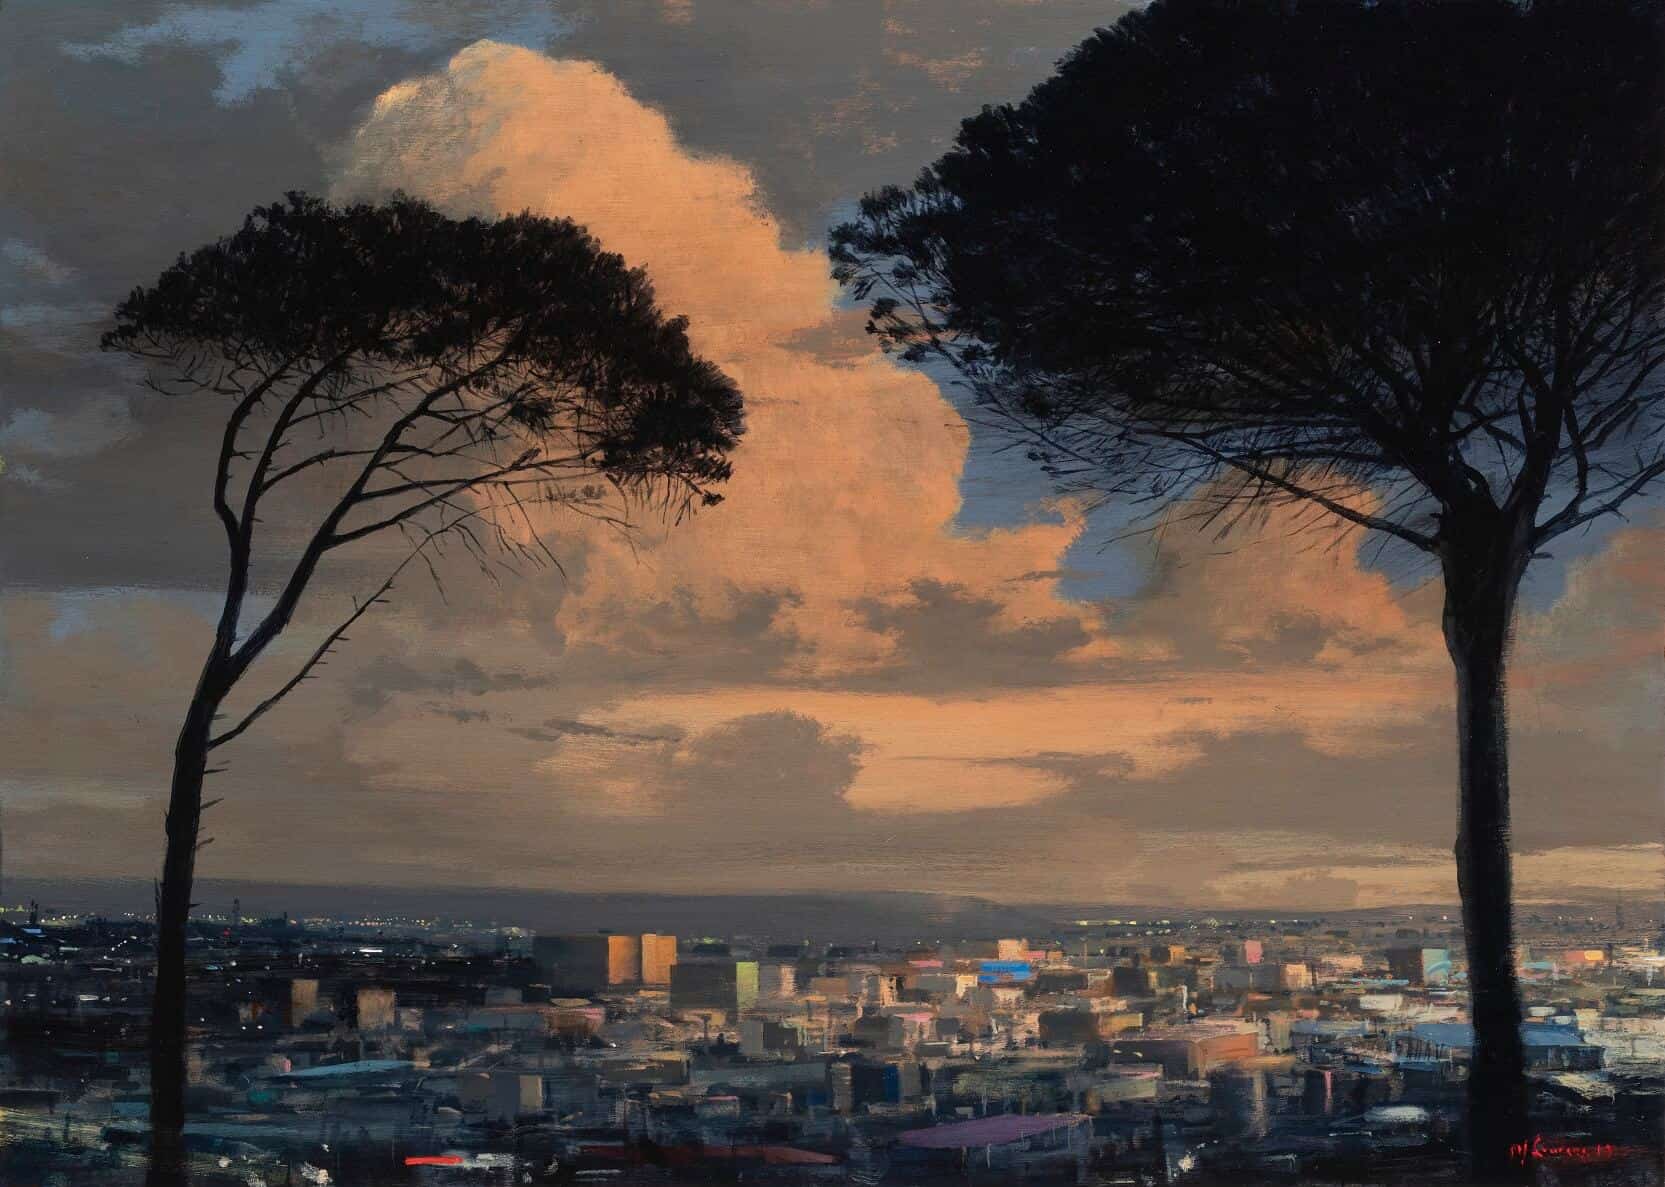 MJ Lourens, Longing through the trees, 2019. Acrylic on board, 500 x 700cm. Courtesy of the artist & La Motte Museum.